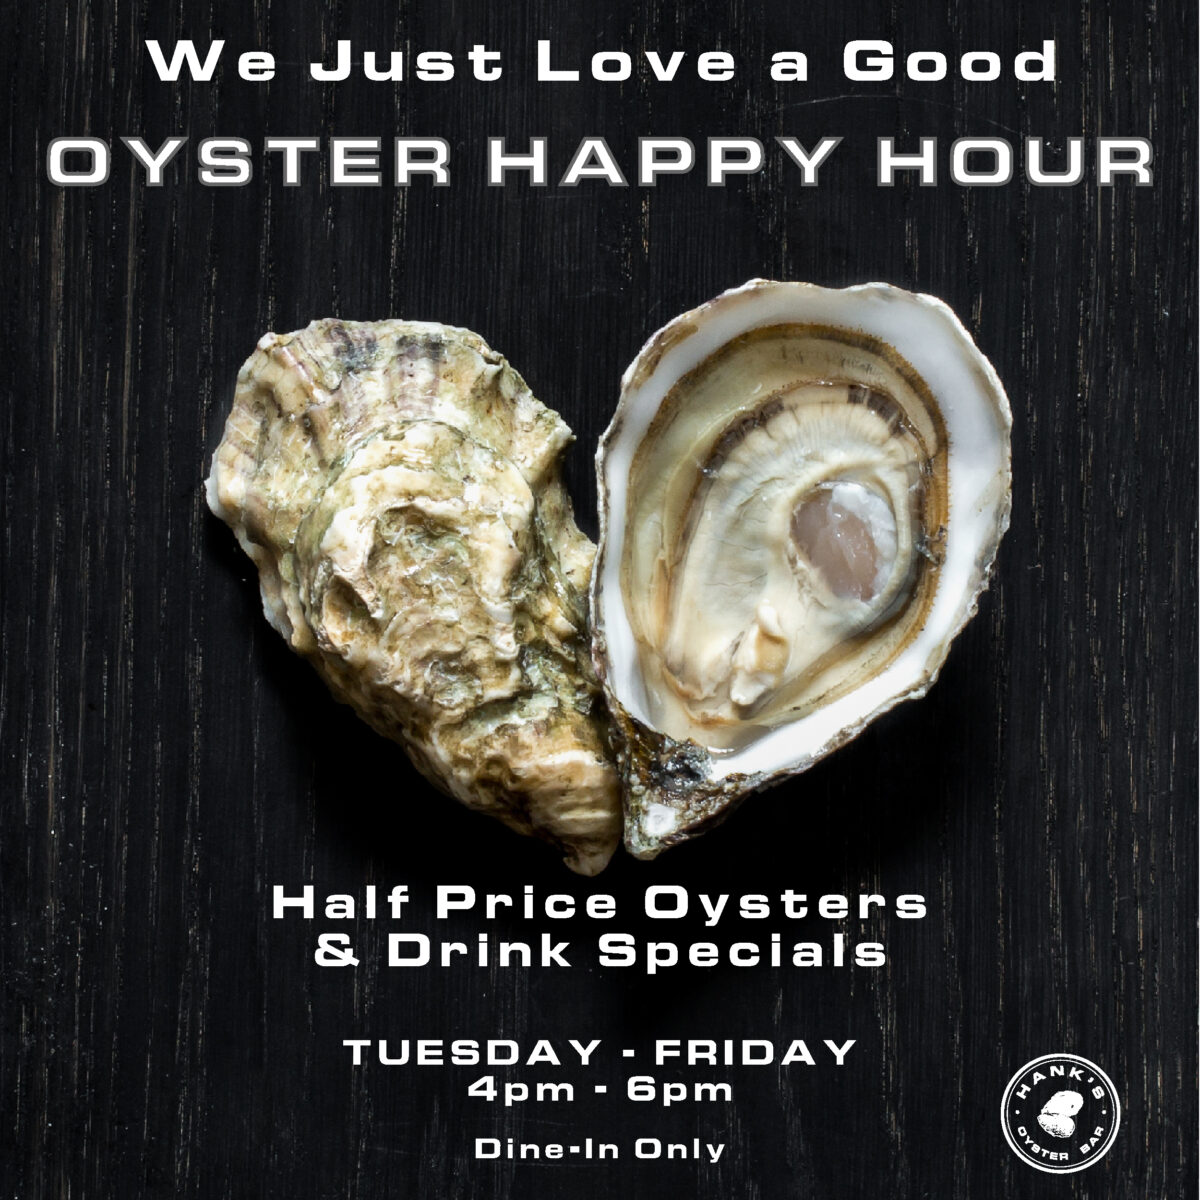 Oyster Happy Hour The Wharf - Hank's Oyster Bar